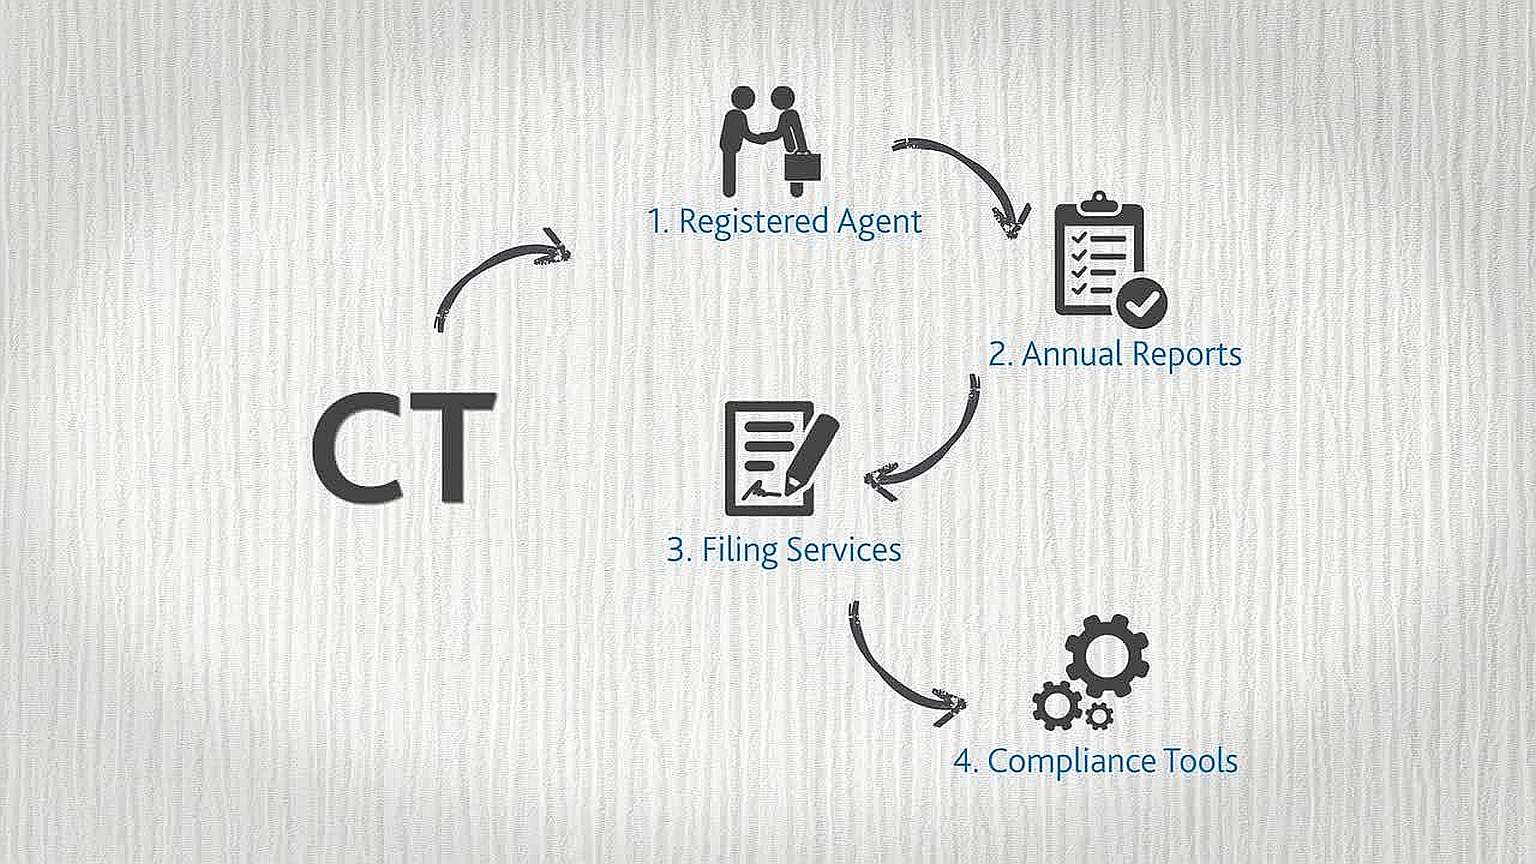 CT Assurance provides scalable support throughout the lifecycle of your business.